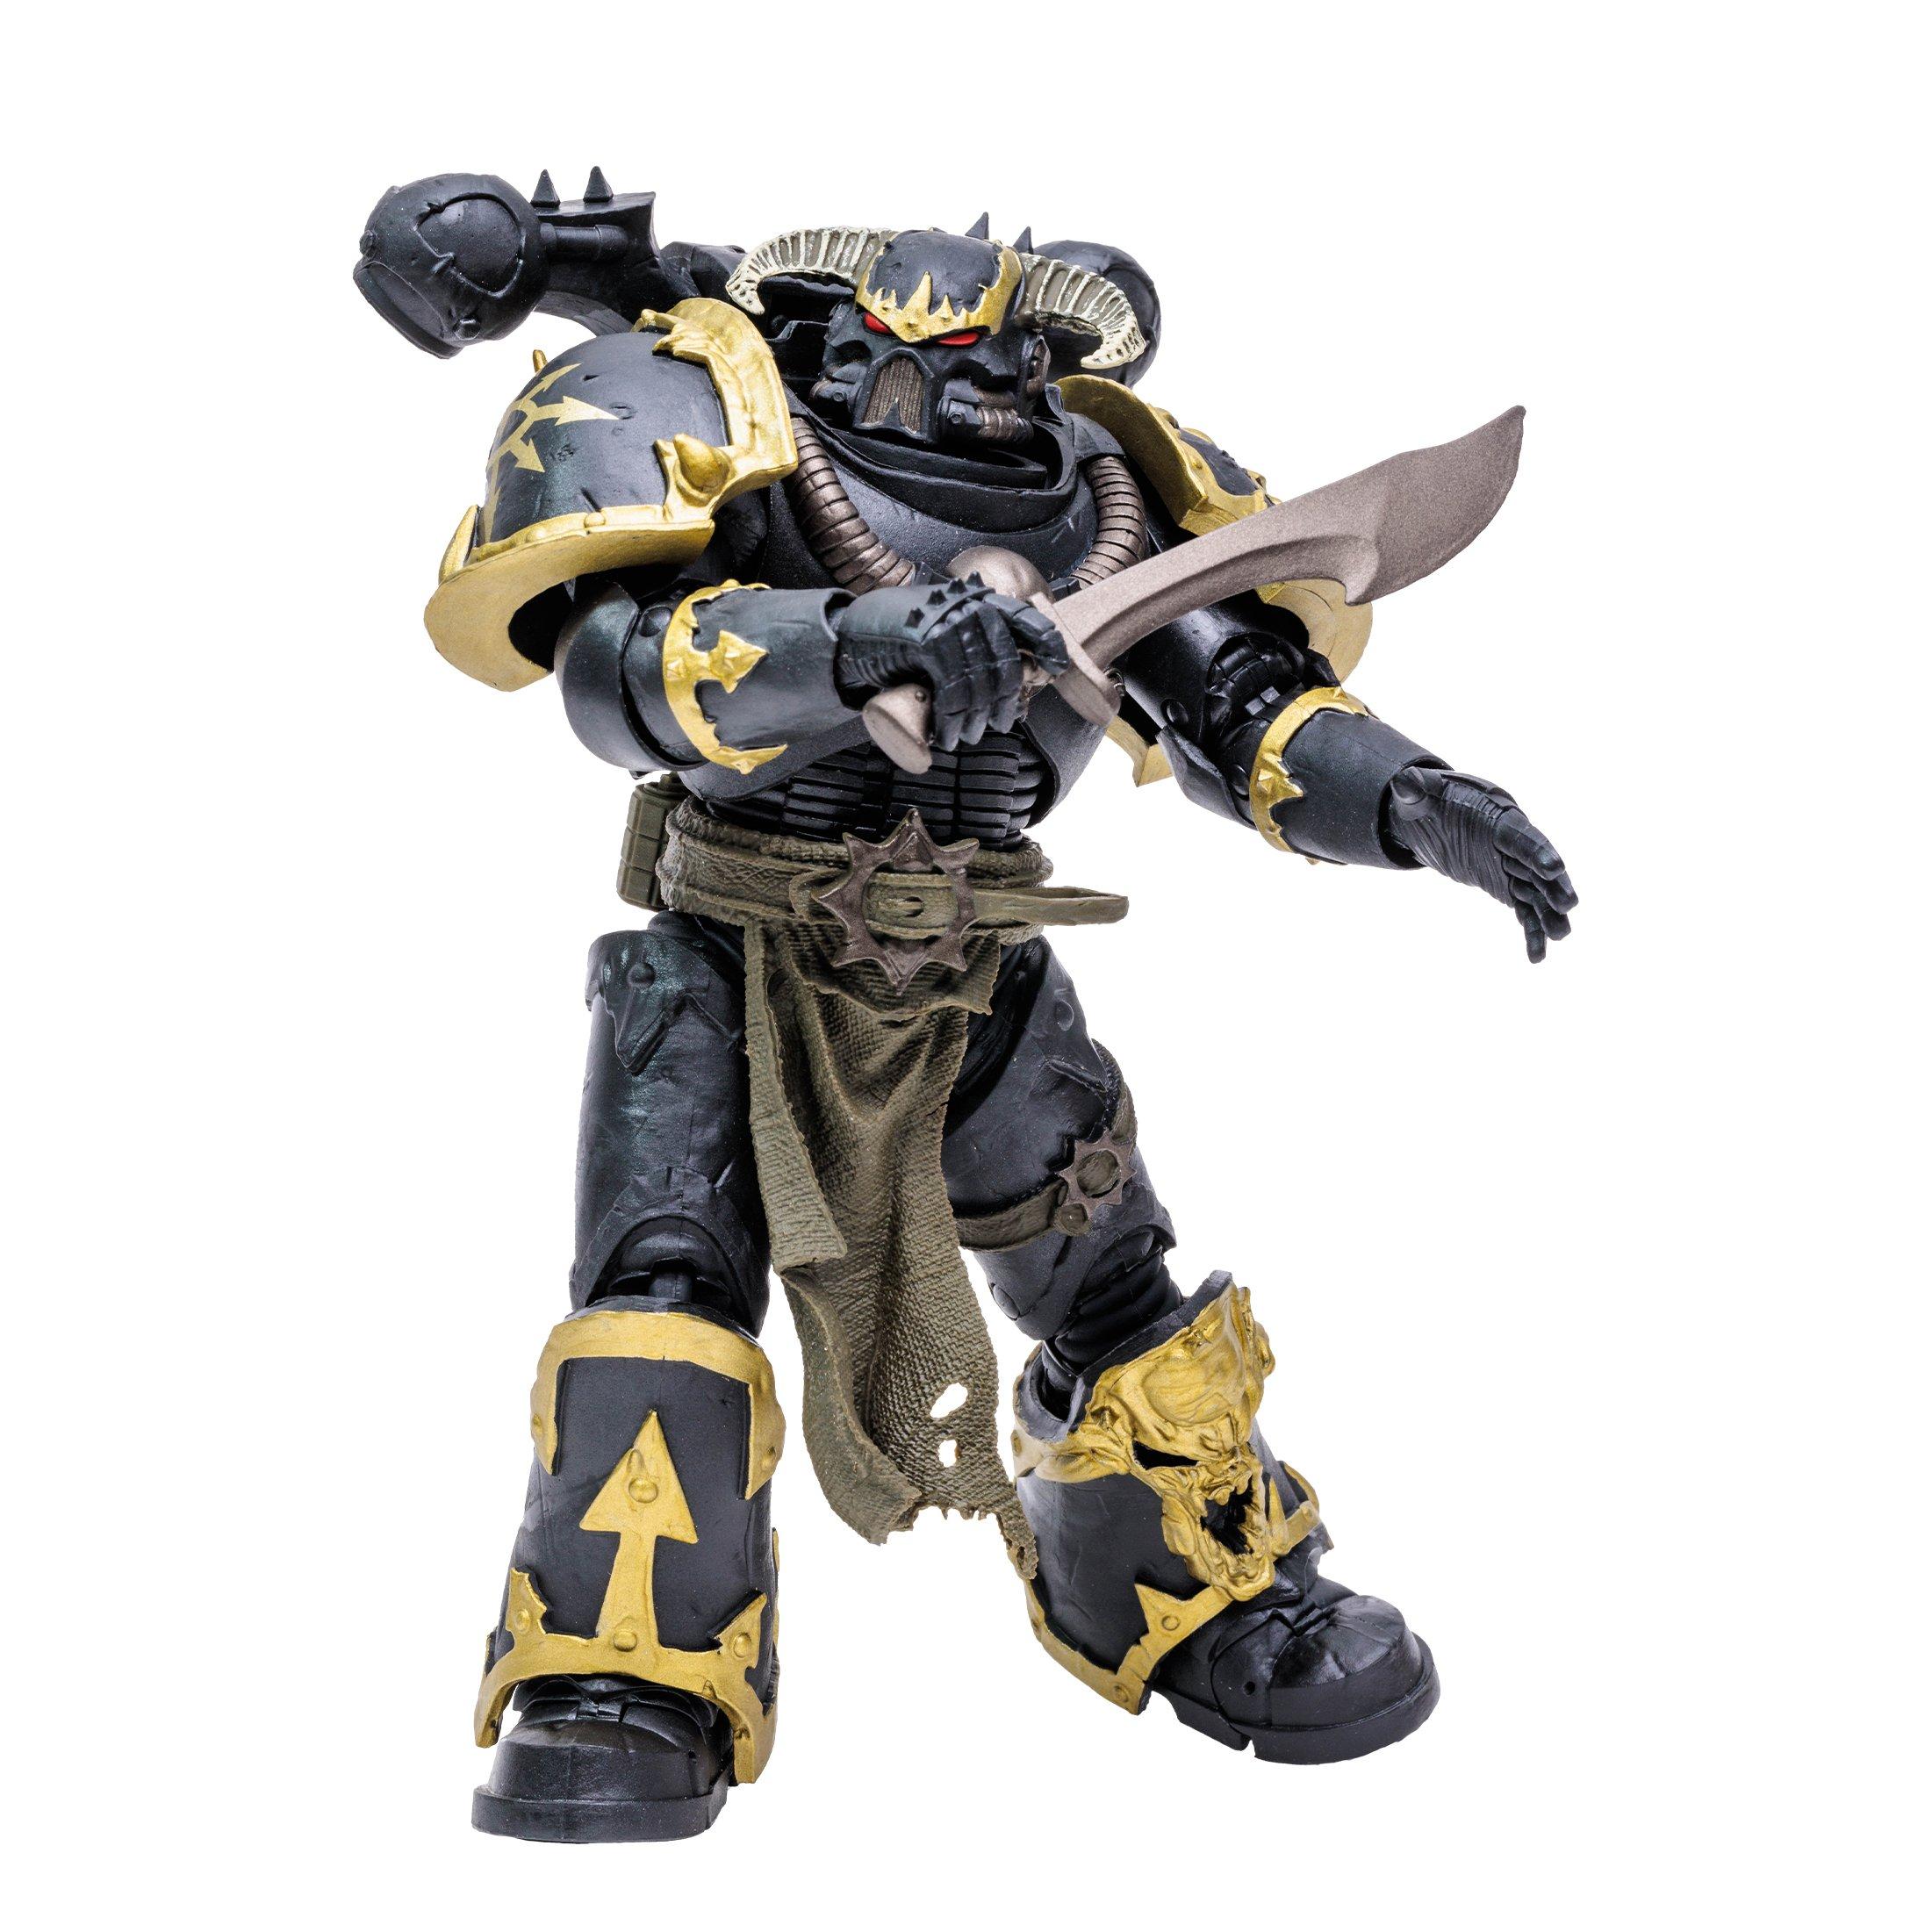 list item 6 of 10 McFarlane Toys Warhammer 40,000 Chaos Space Marine 7-in Scale Action Figure